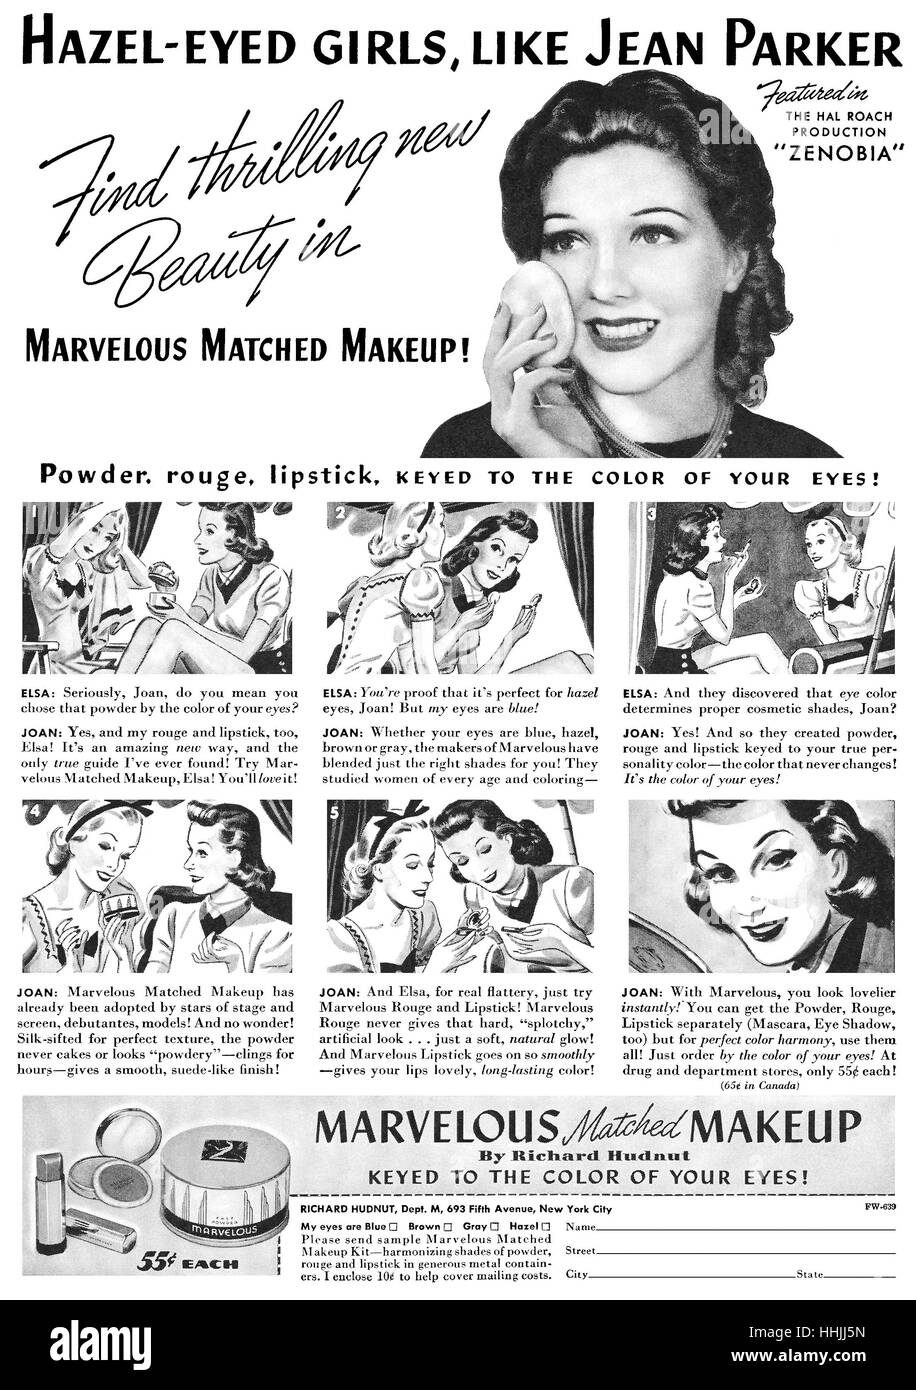 1939 U.S. advertisement for Marvelous make-up by Richard Hudnut, featuring actress Jean Parker Stock Photo